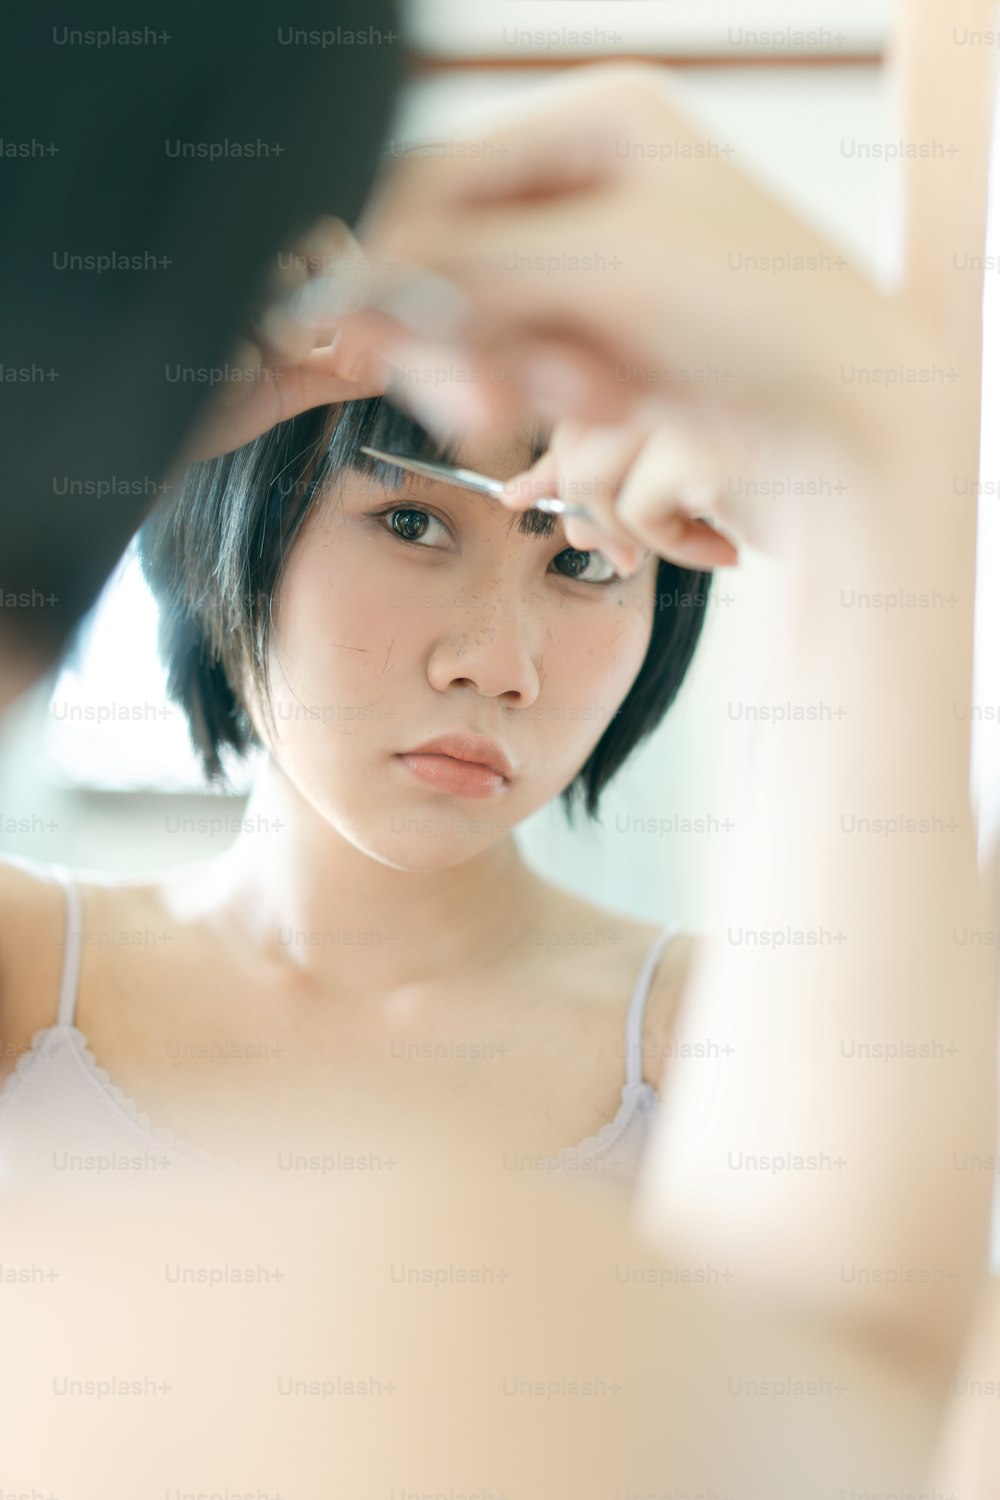 Quarantine lifestyle stay at home concept. Young adult asian woman self cutting bangs haircut with scissors. Eyes looking at a mirror. Background on day with nature light.